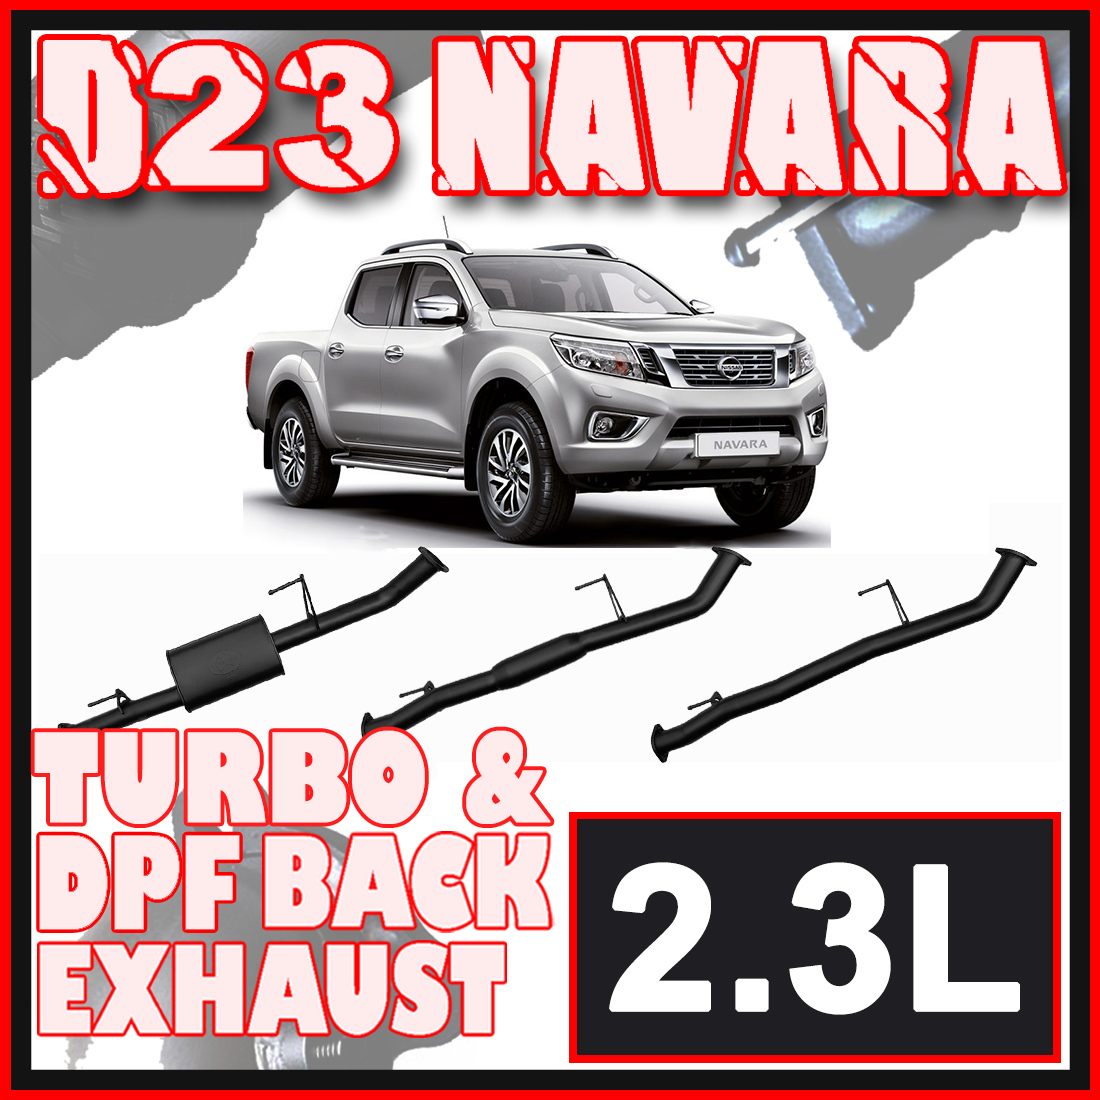 Nissan D23 Navara Exhaust NP300 3" Systems image